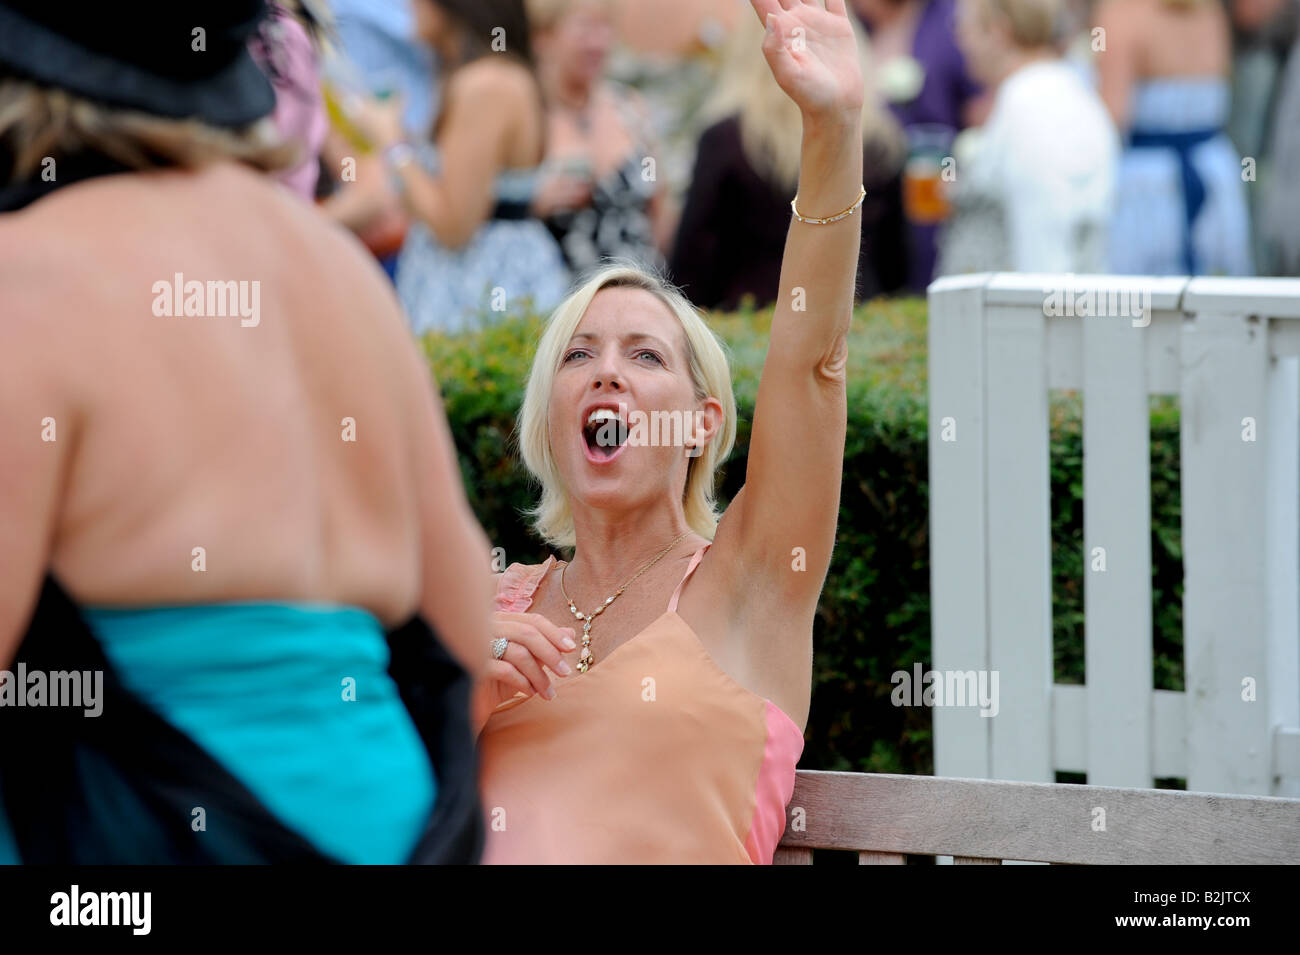 Glorious Goodwood: crowds pack the stands on the popular ladies' day. Stock Photo